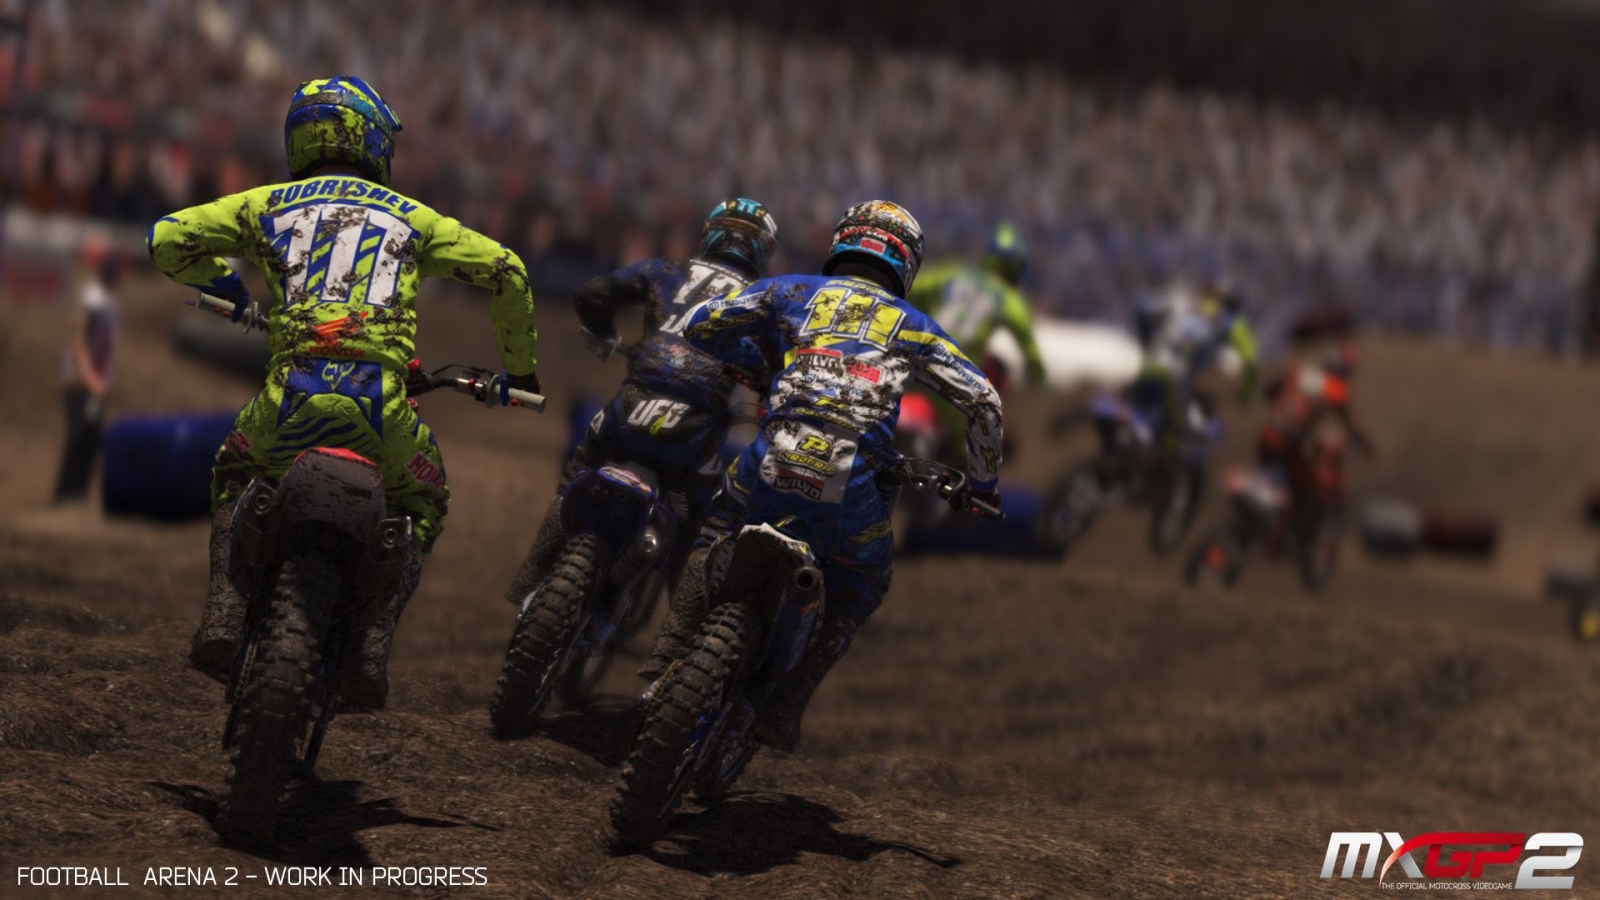 PS4 MXGP 2 - The Official Motocross Videogame